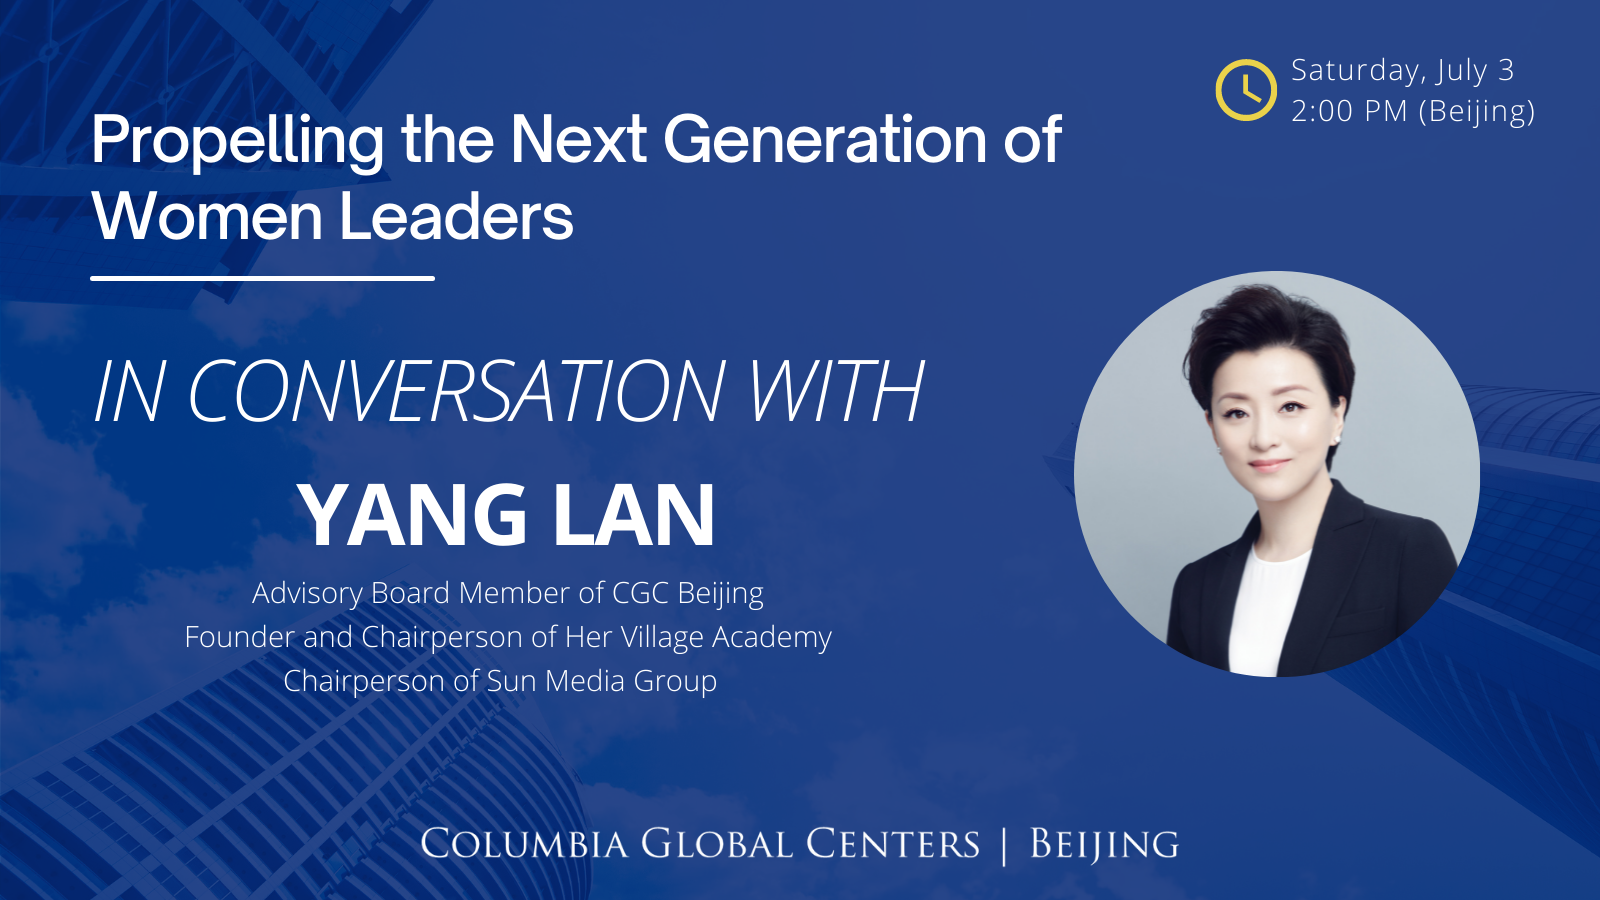 In Conversation With Yang Lan